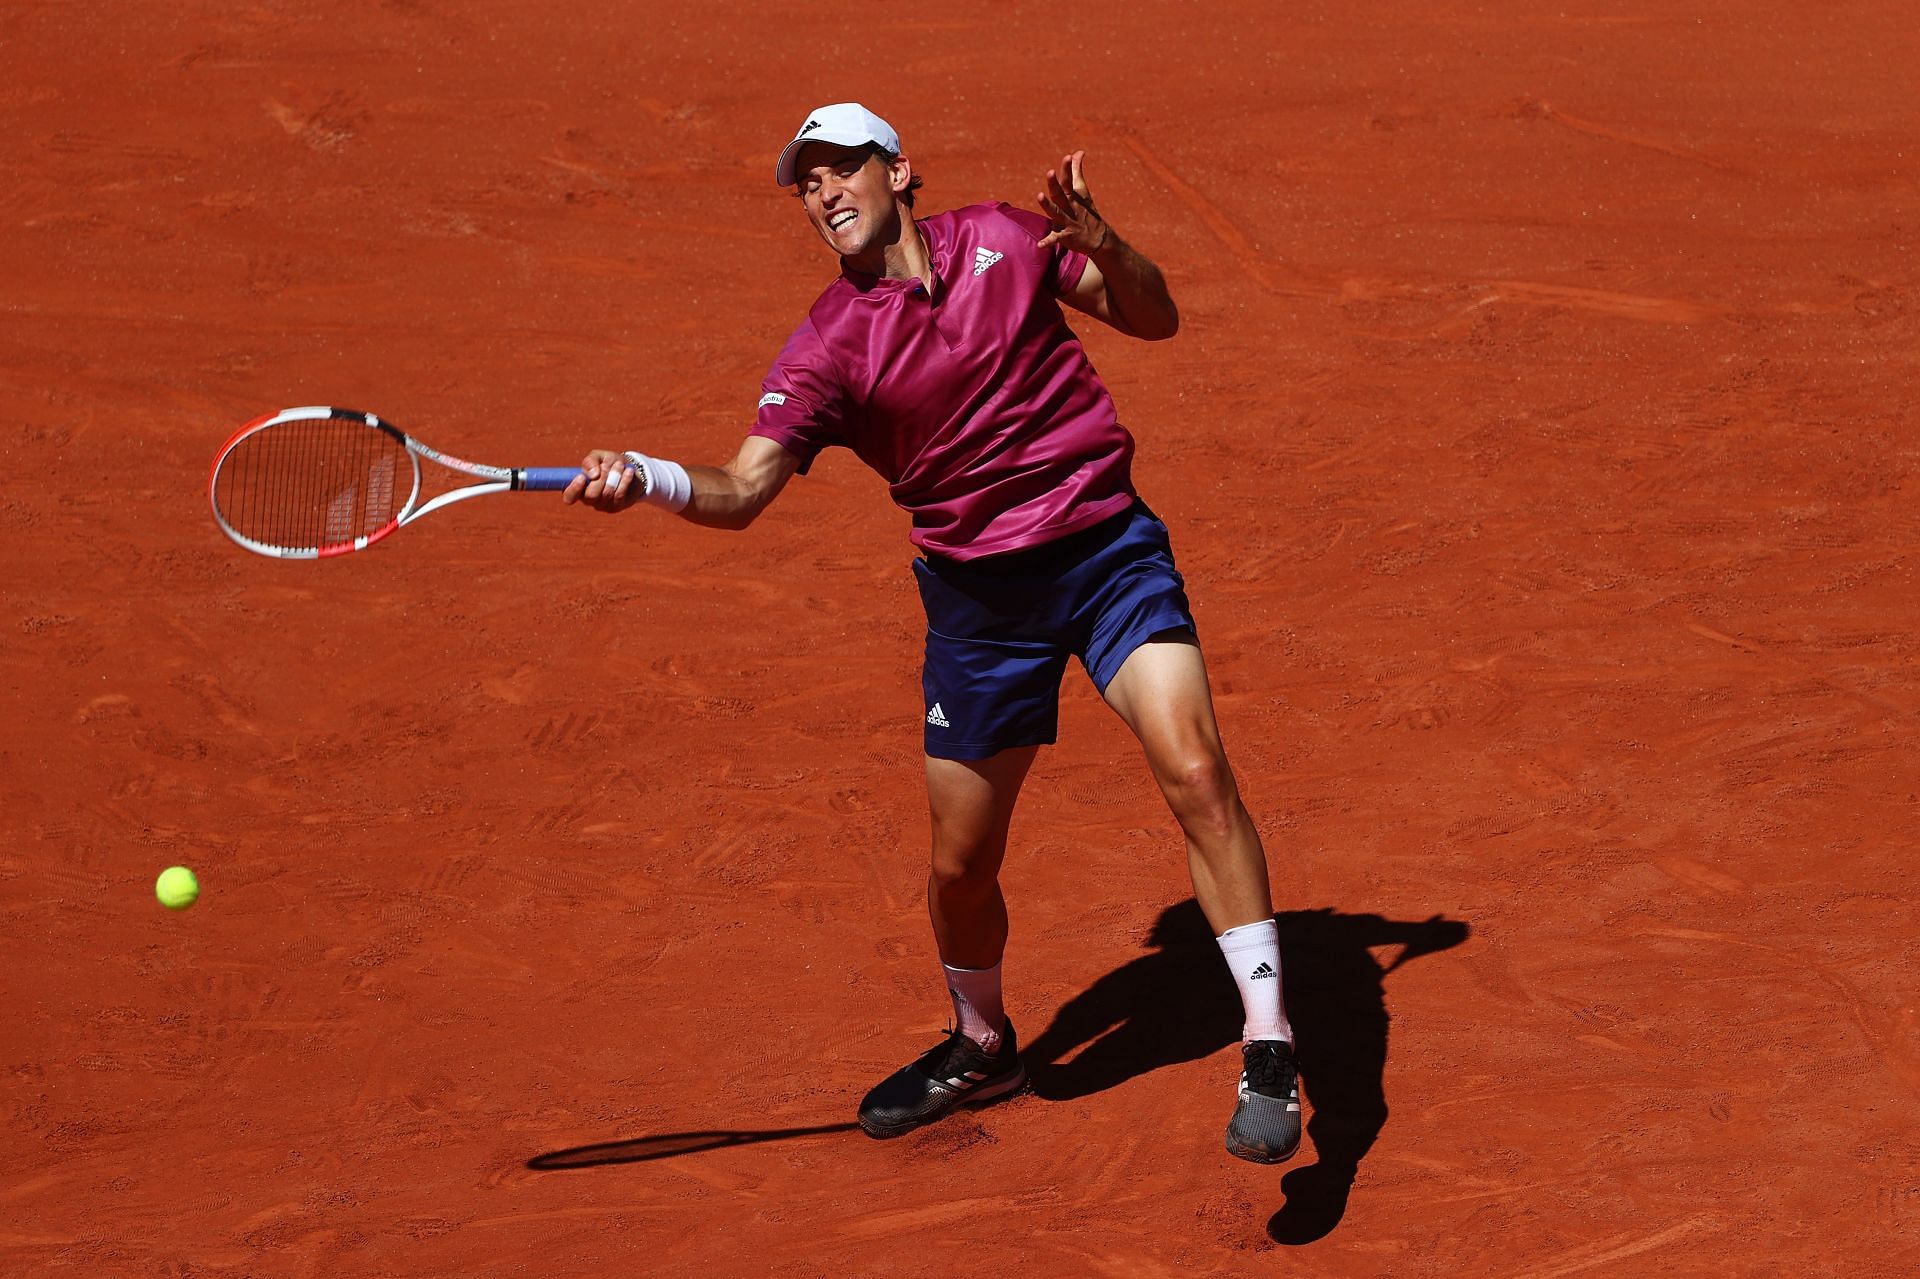 Dominic Thiem at the 2021 French Open - Day One